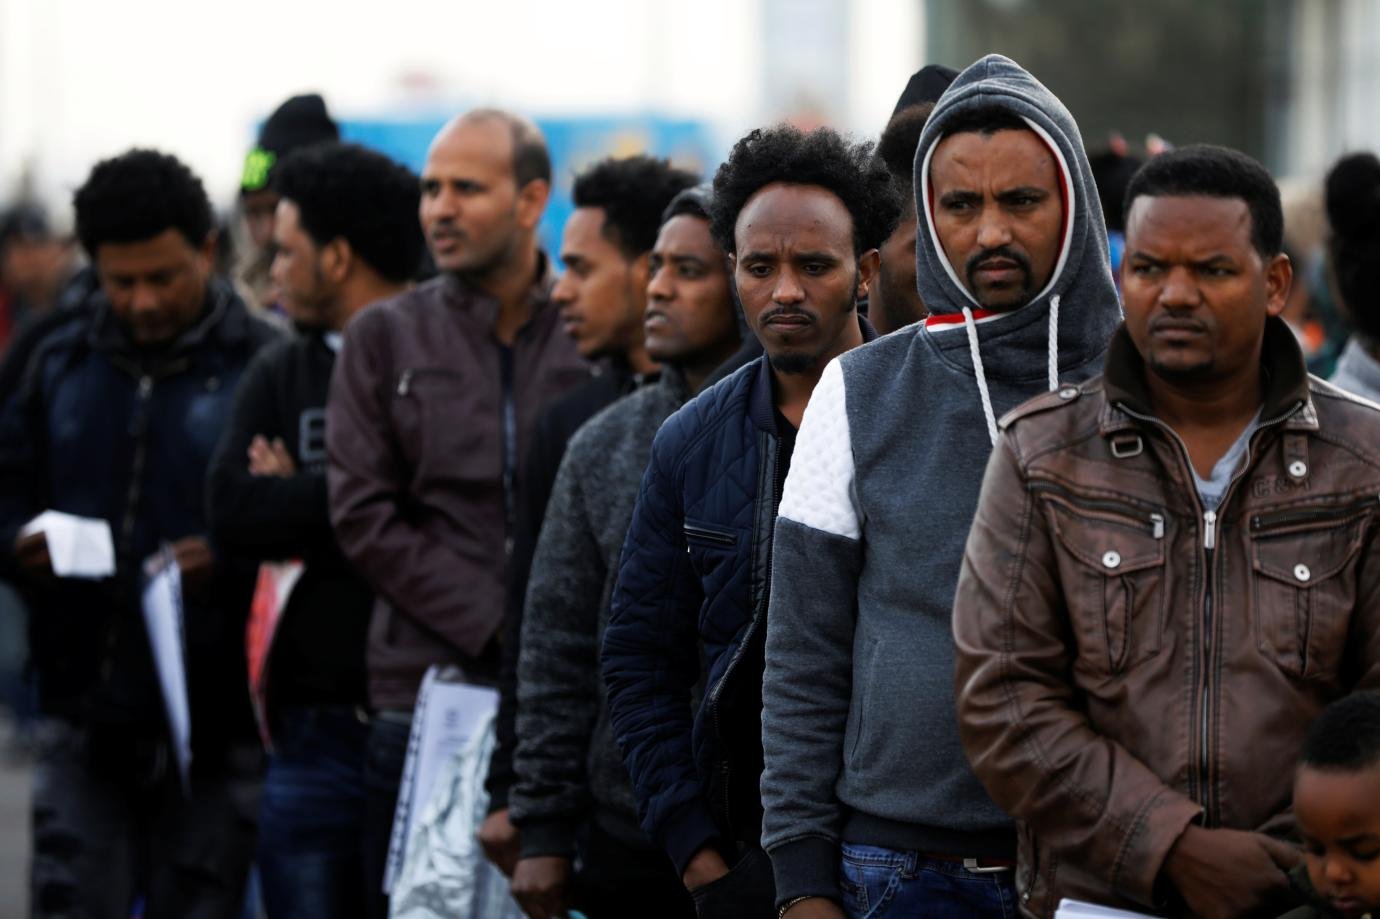 The Most Common Destination for African Immigrants is Neither Europe nor North America